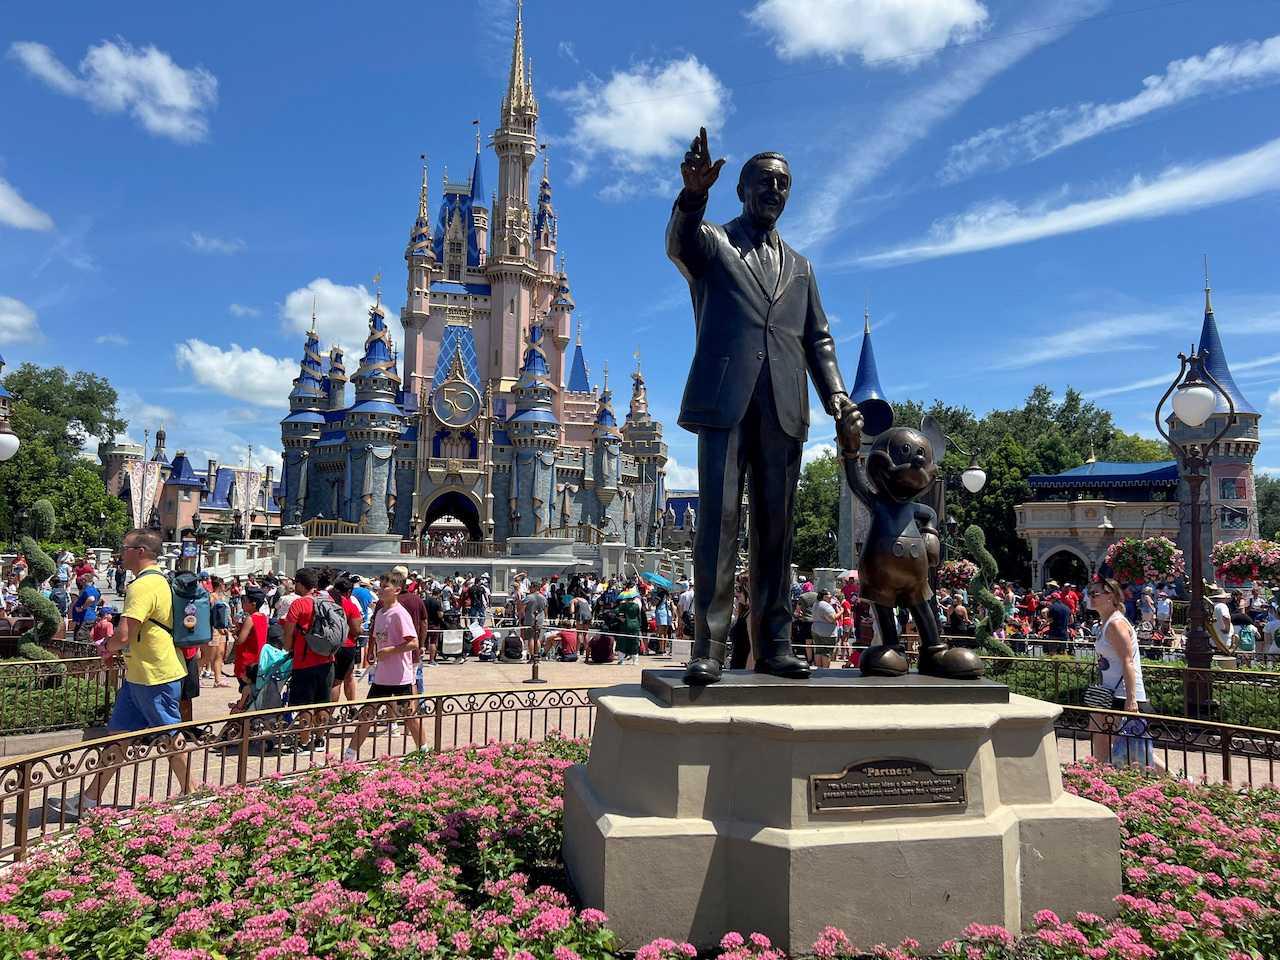 People gather at the Magic Kingdom theme park before the 'Festival of Fantasy' parade at Walt Disney World in Orlando, Florida, July 30, 2022. Photo: Reuters